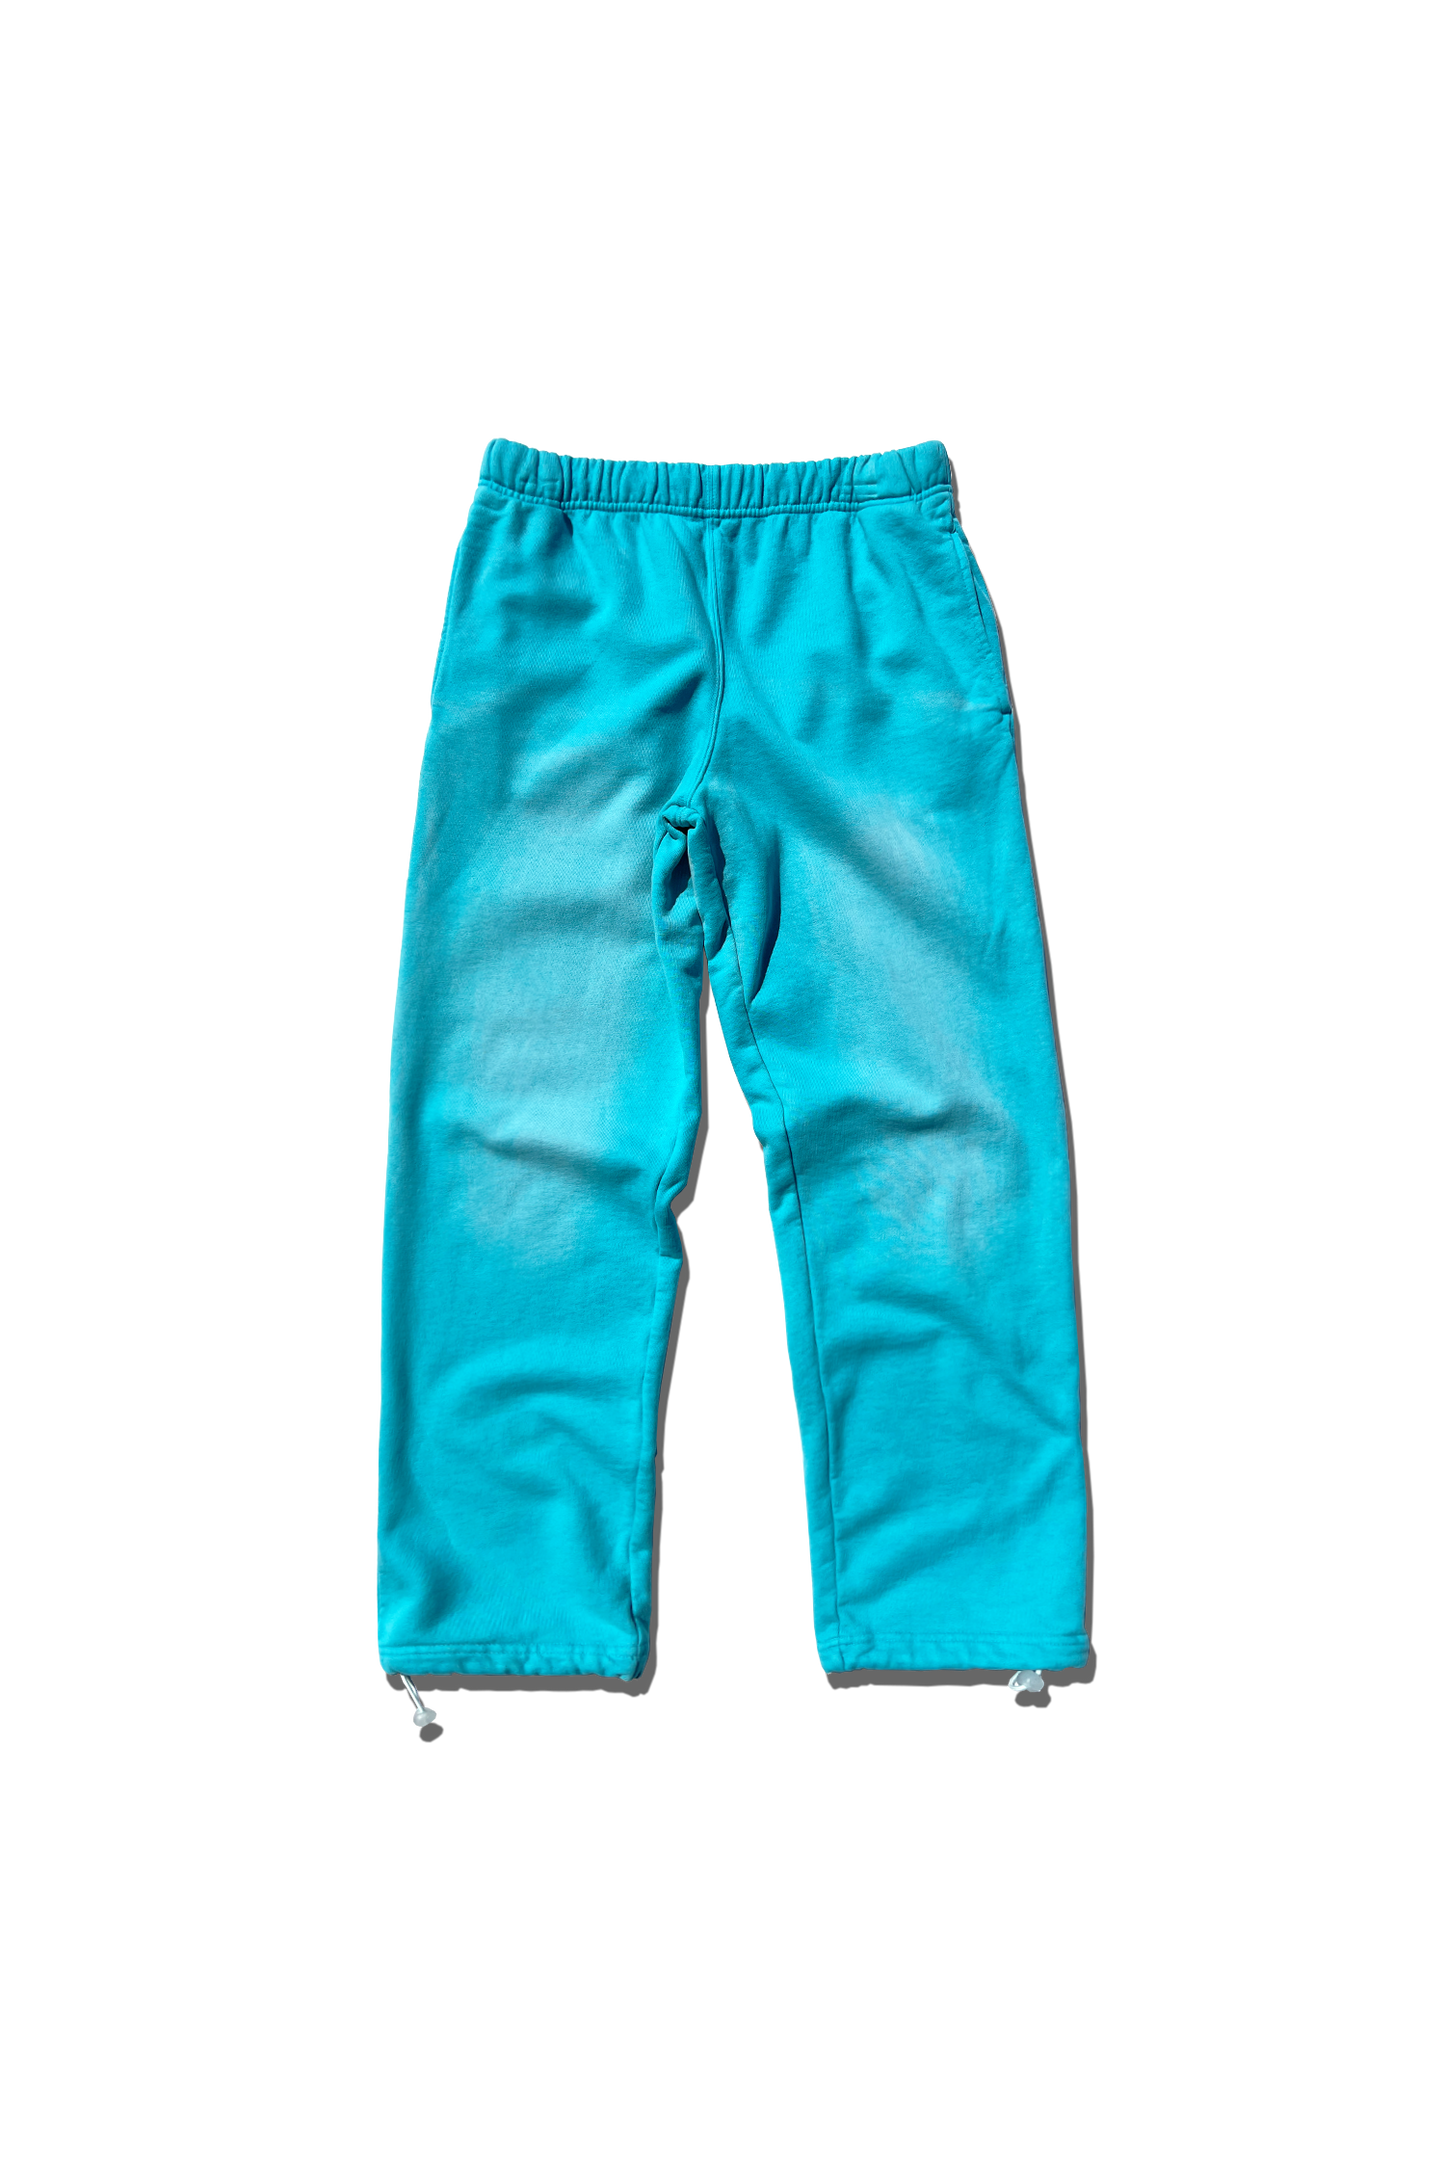 Exclusive Recess Sweatpants - Faded Offshore Blue